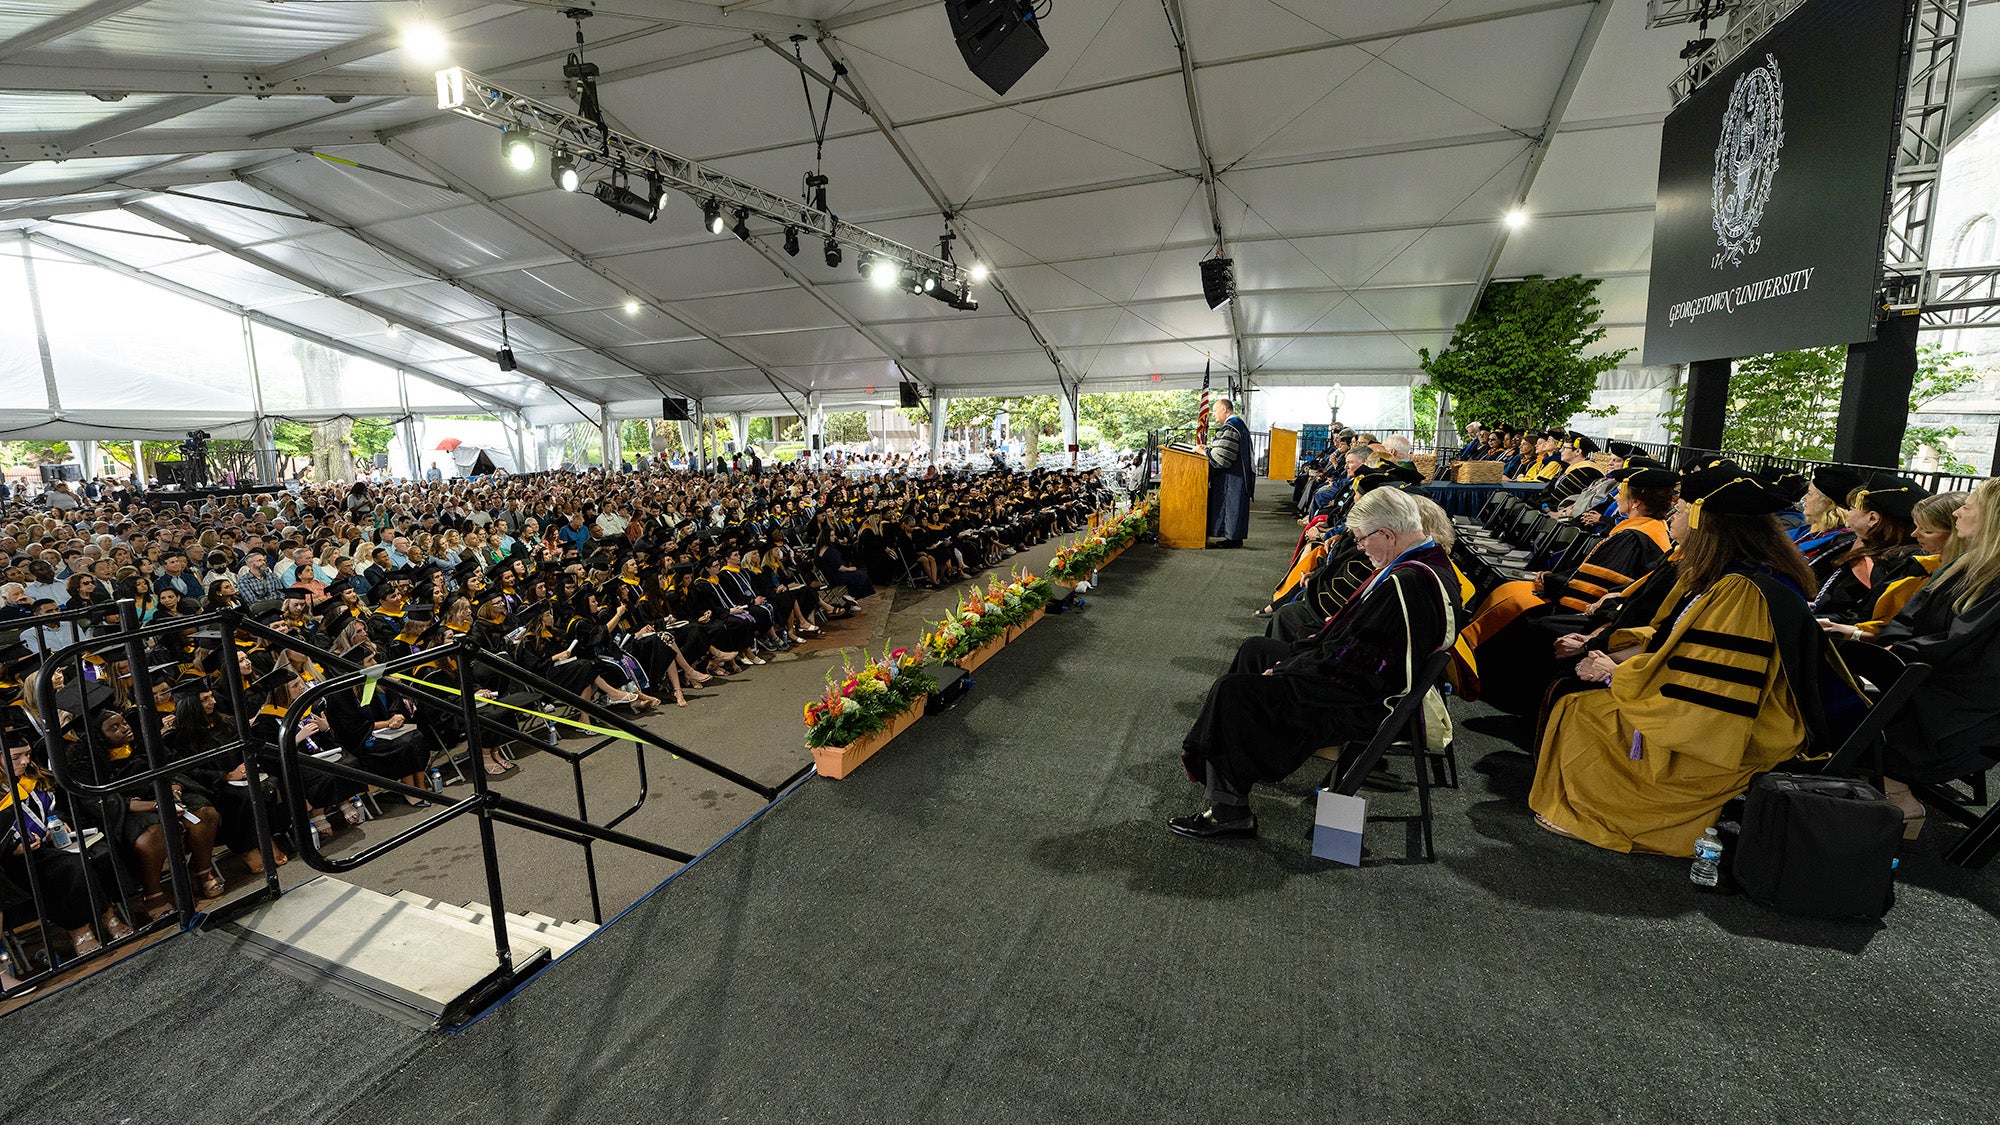 A view of the stage at Commencement as well as the audience of graduates and their supporters